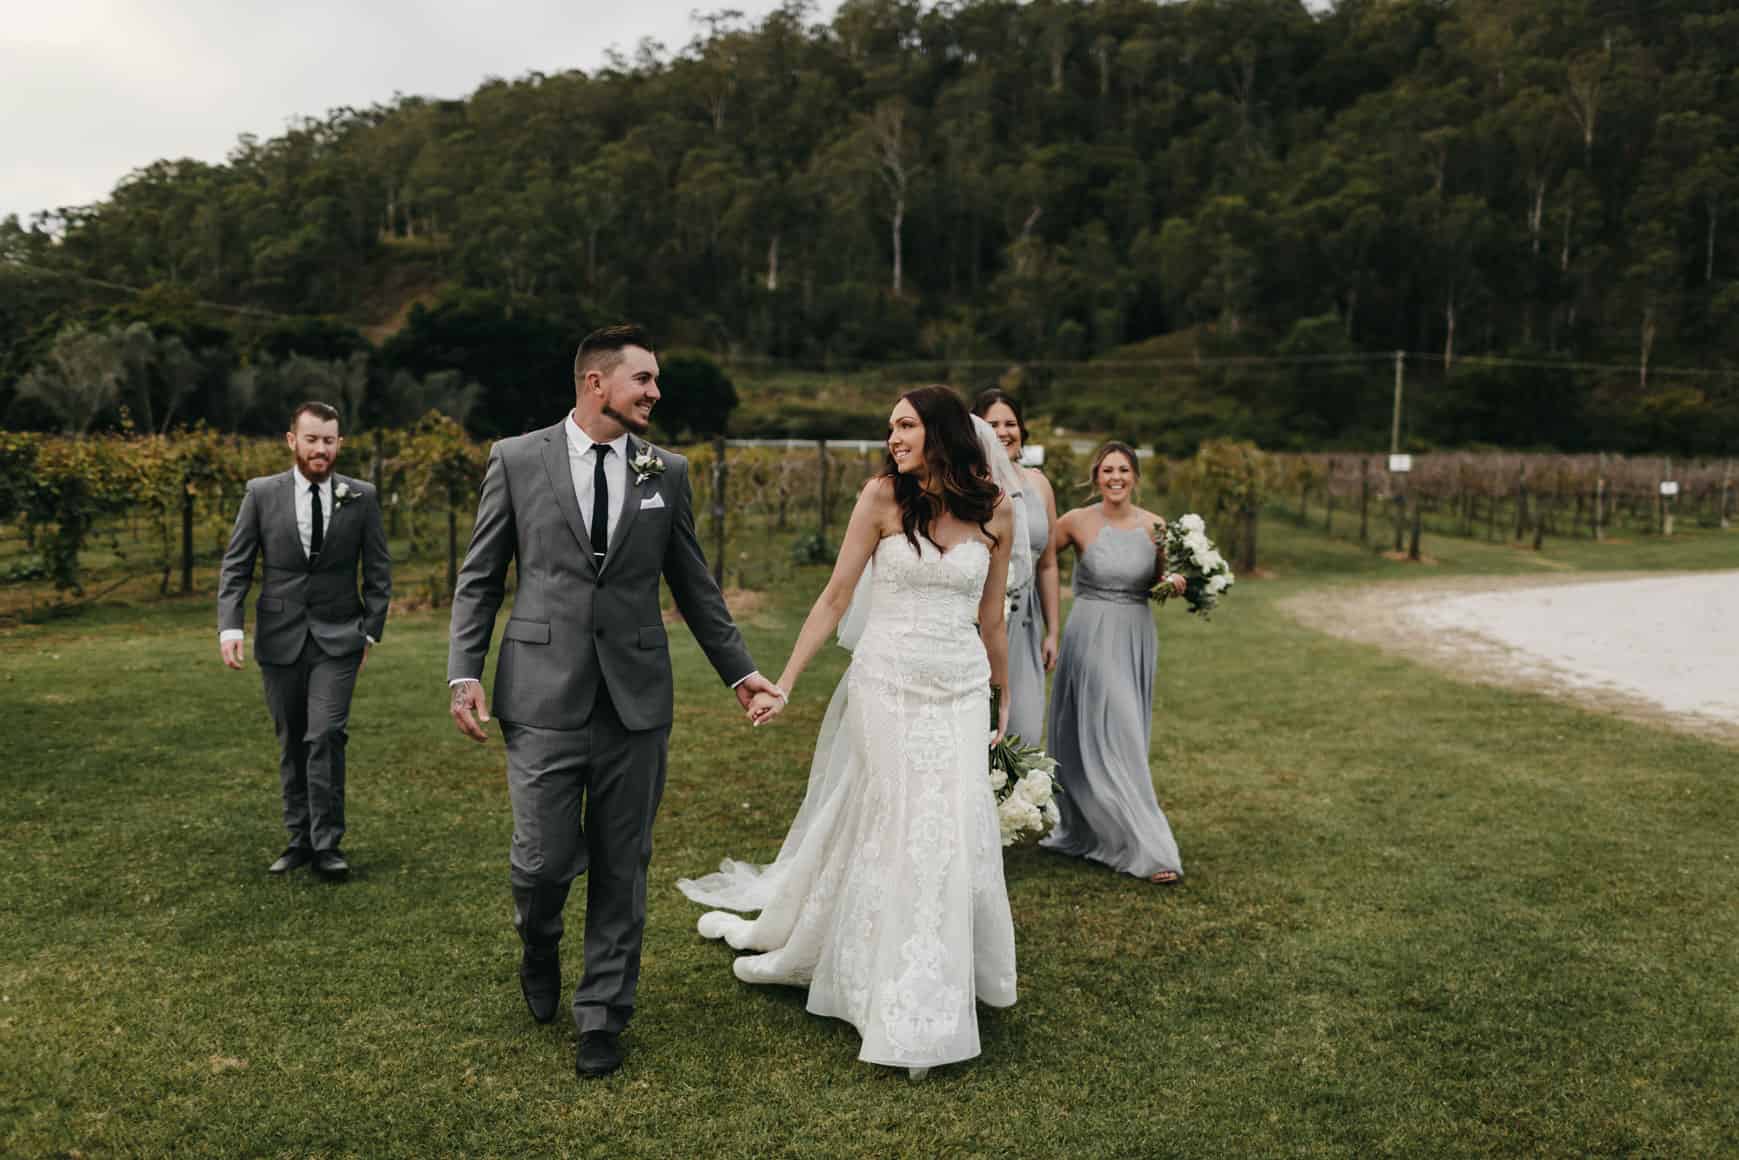 Emily and Mike's wedding at O'Reilly's Canungra Valley Vineyards